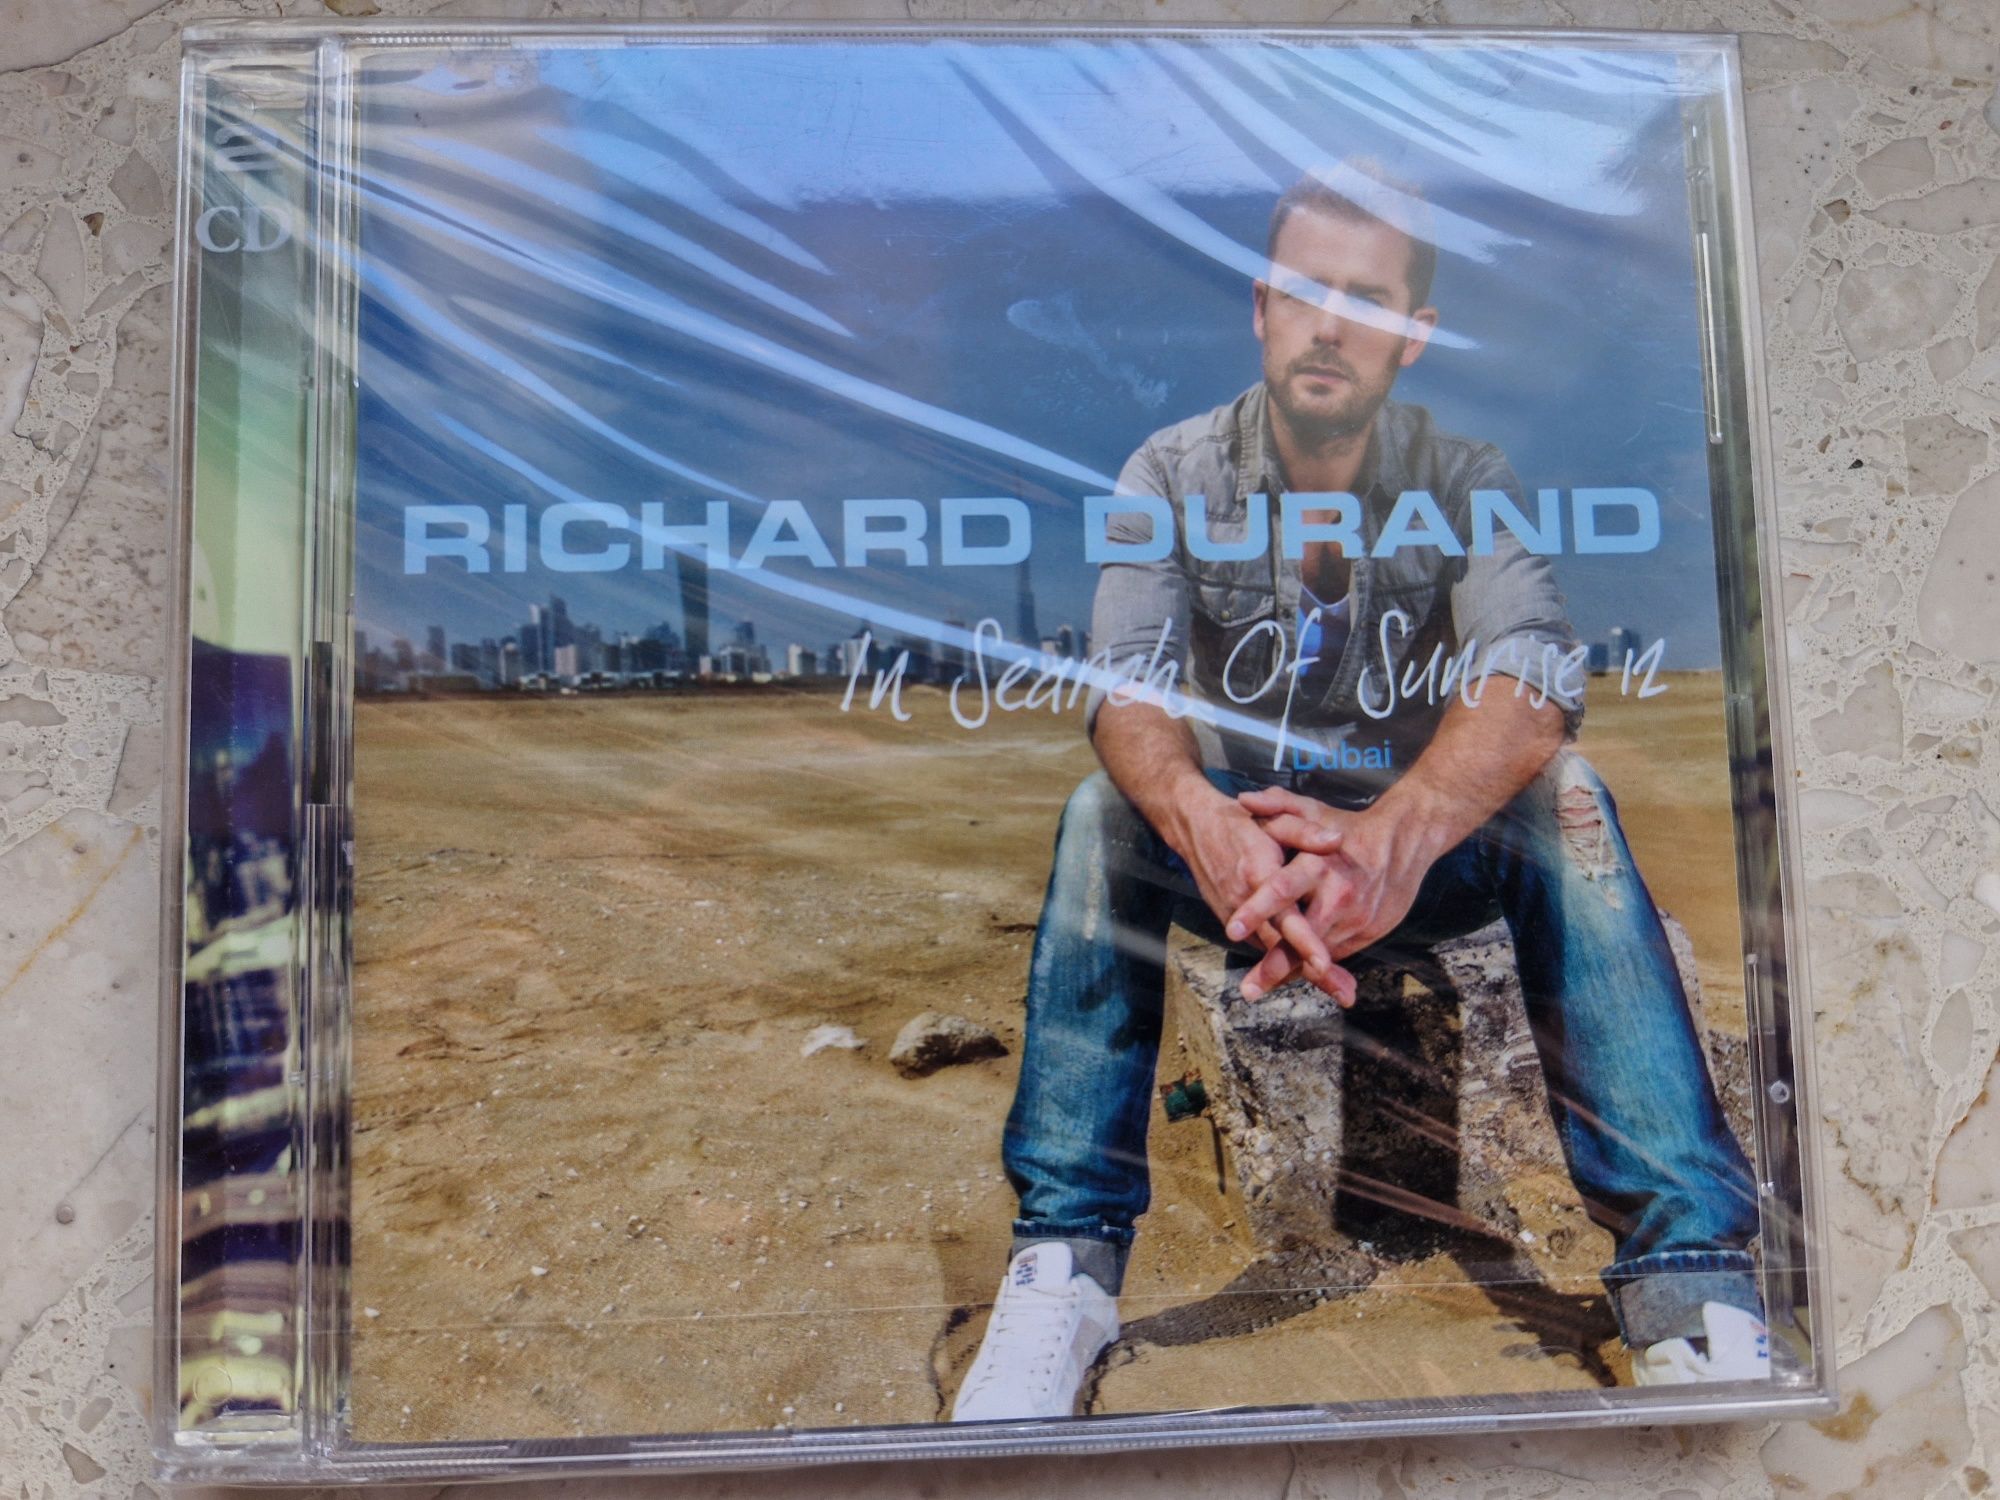 Richard Durand In Search Of Sunrise CD